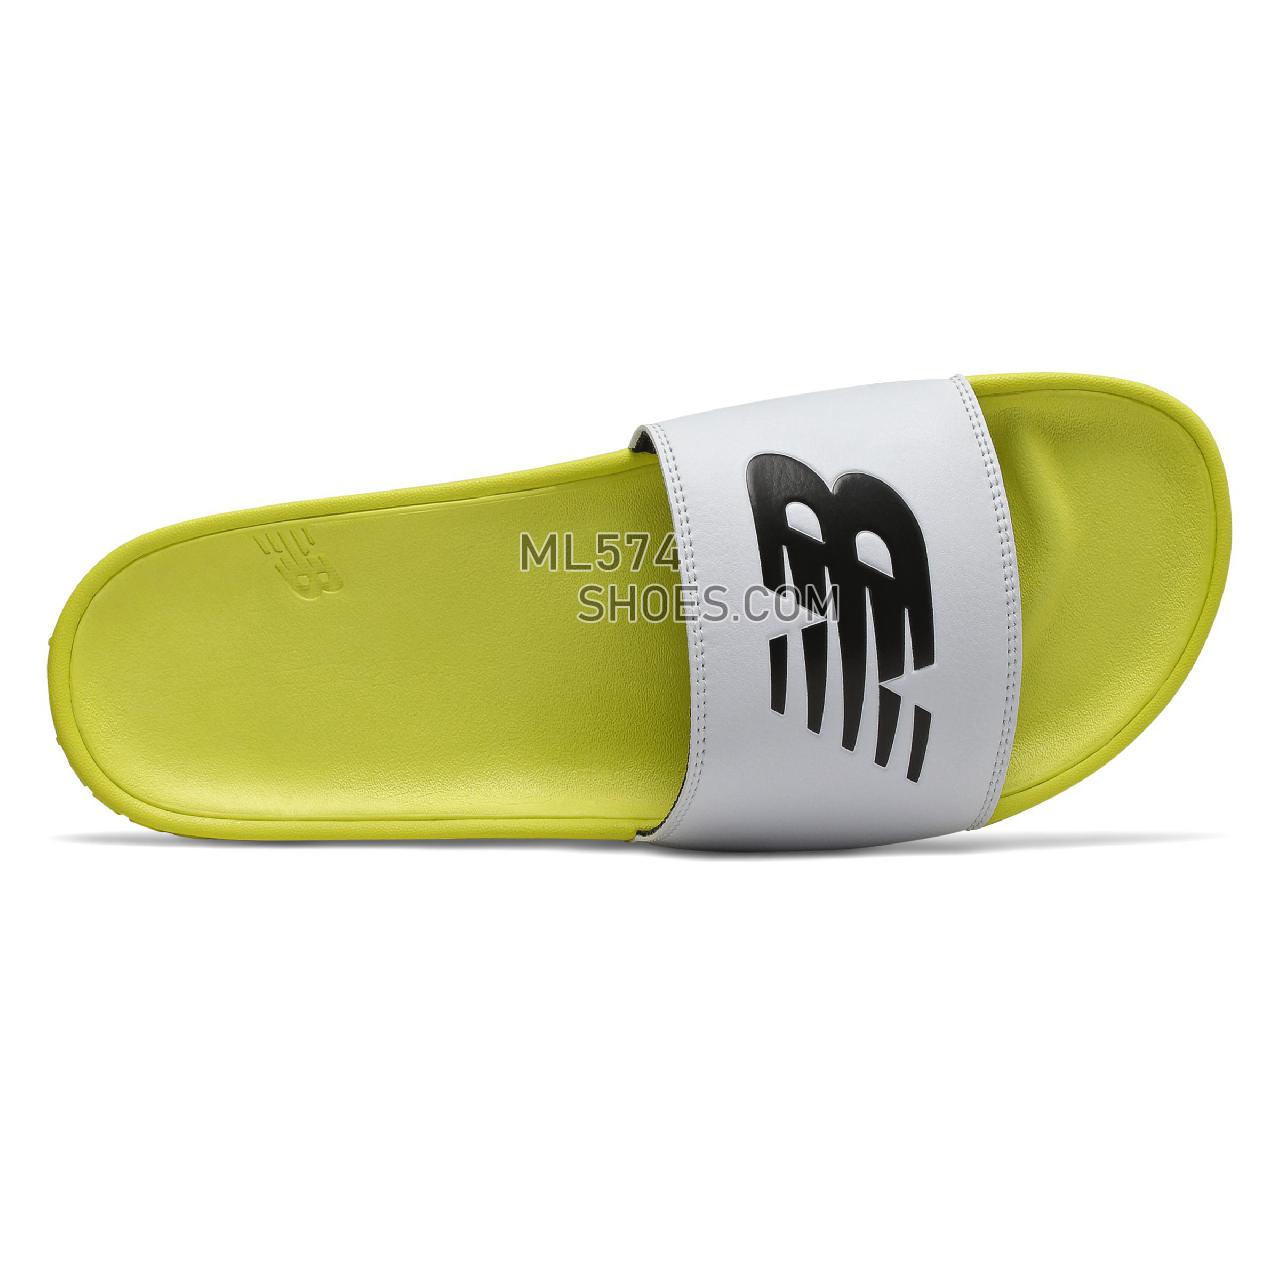 New Balance 200 - Men's Flip Flops - Black with Munsell White and Sulphur Yellow - SMF200BY